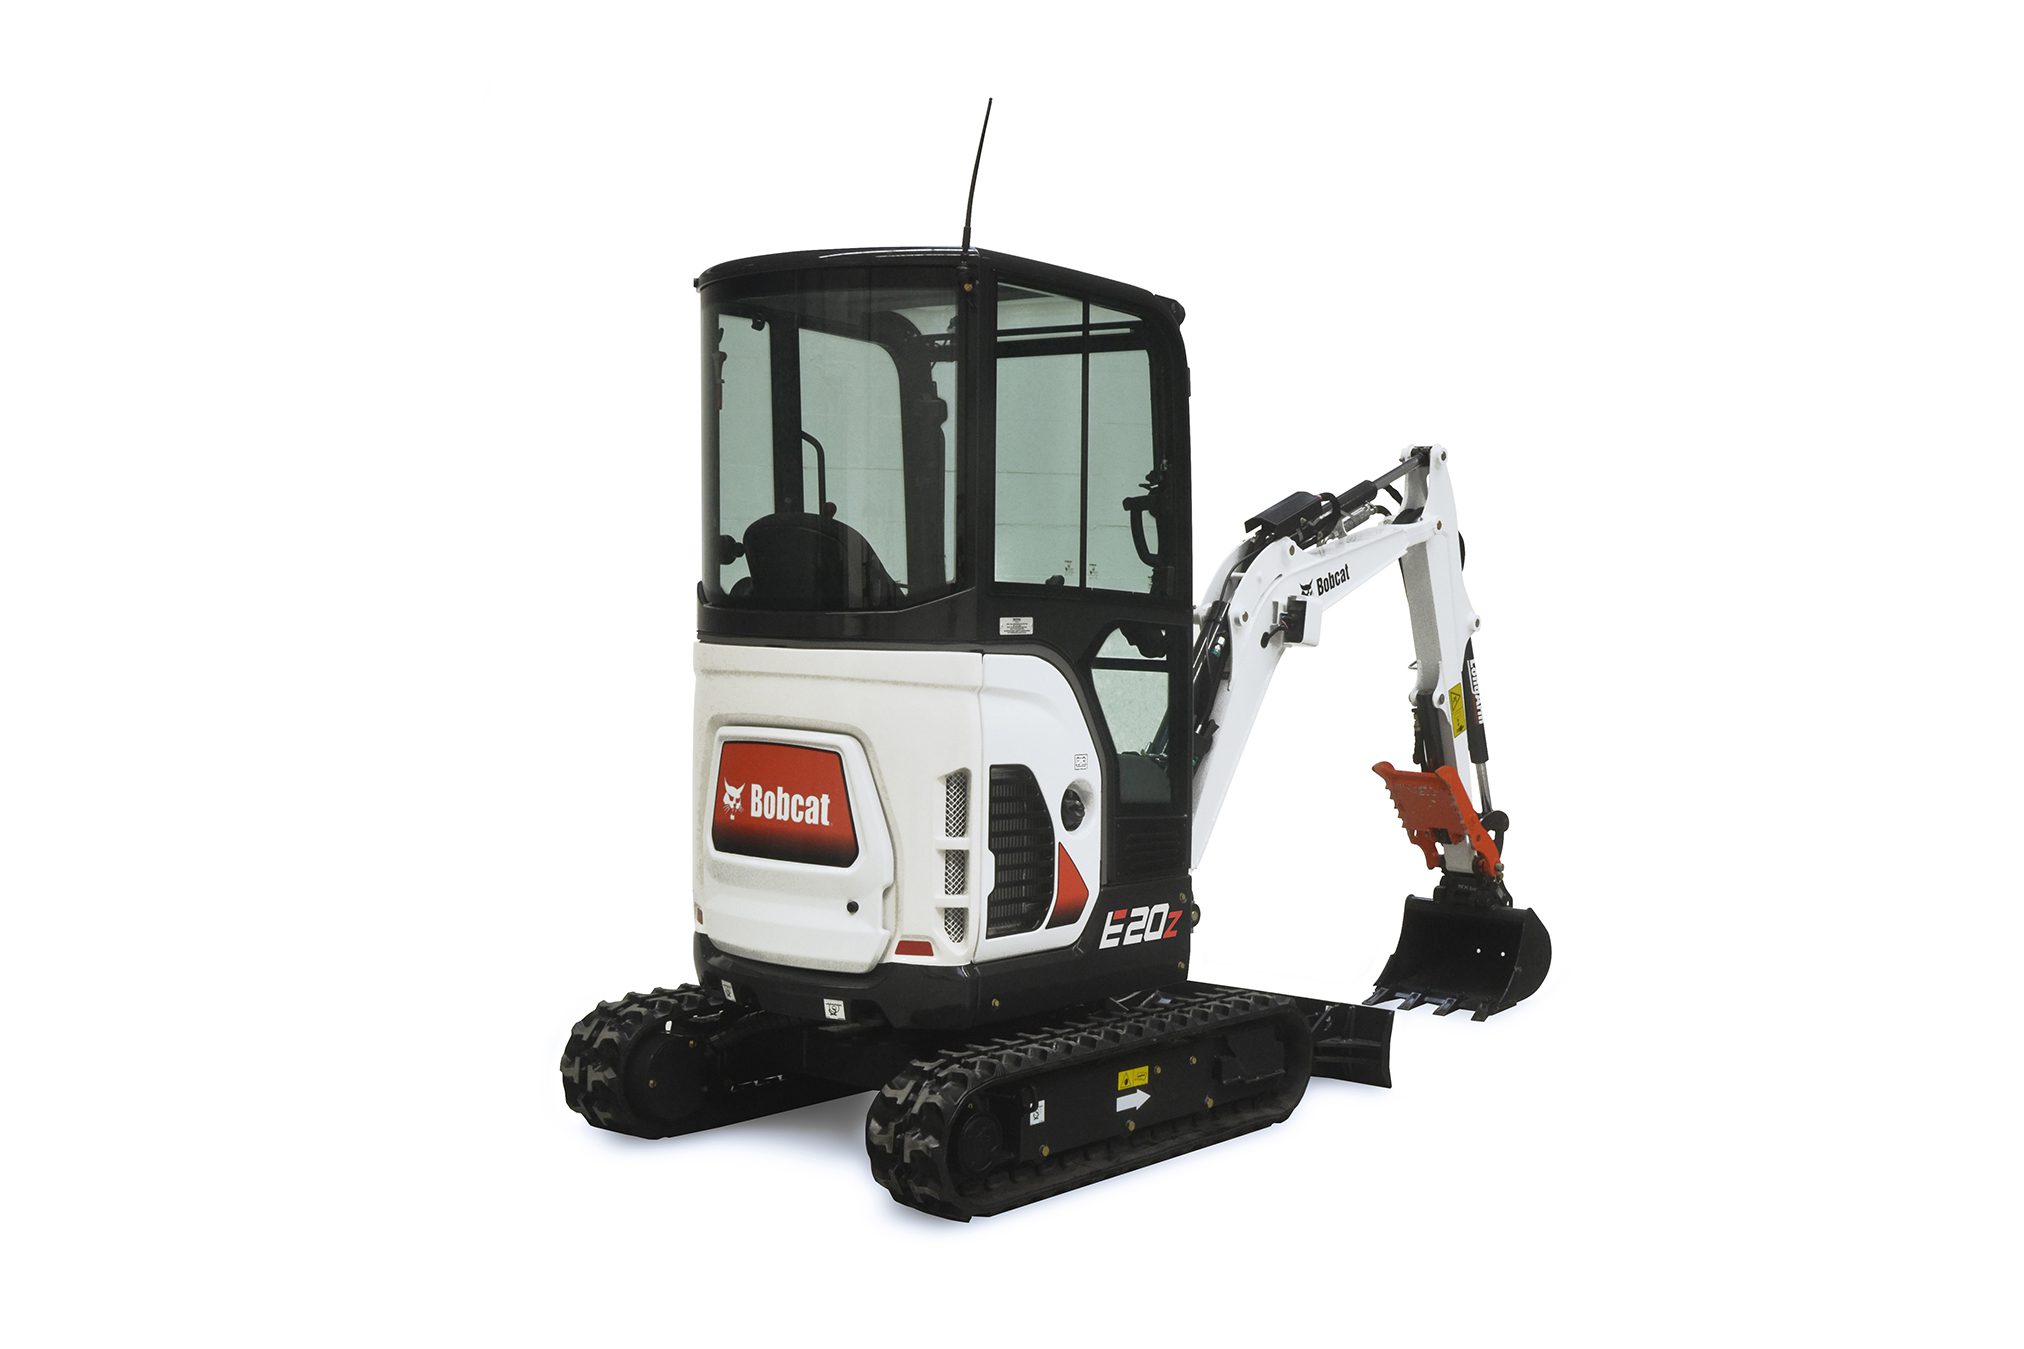 Browse Specs and more for the Bobcat E20 Compact Excavator - Bobcat of North Texas